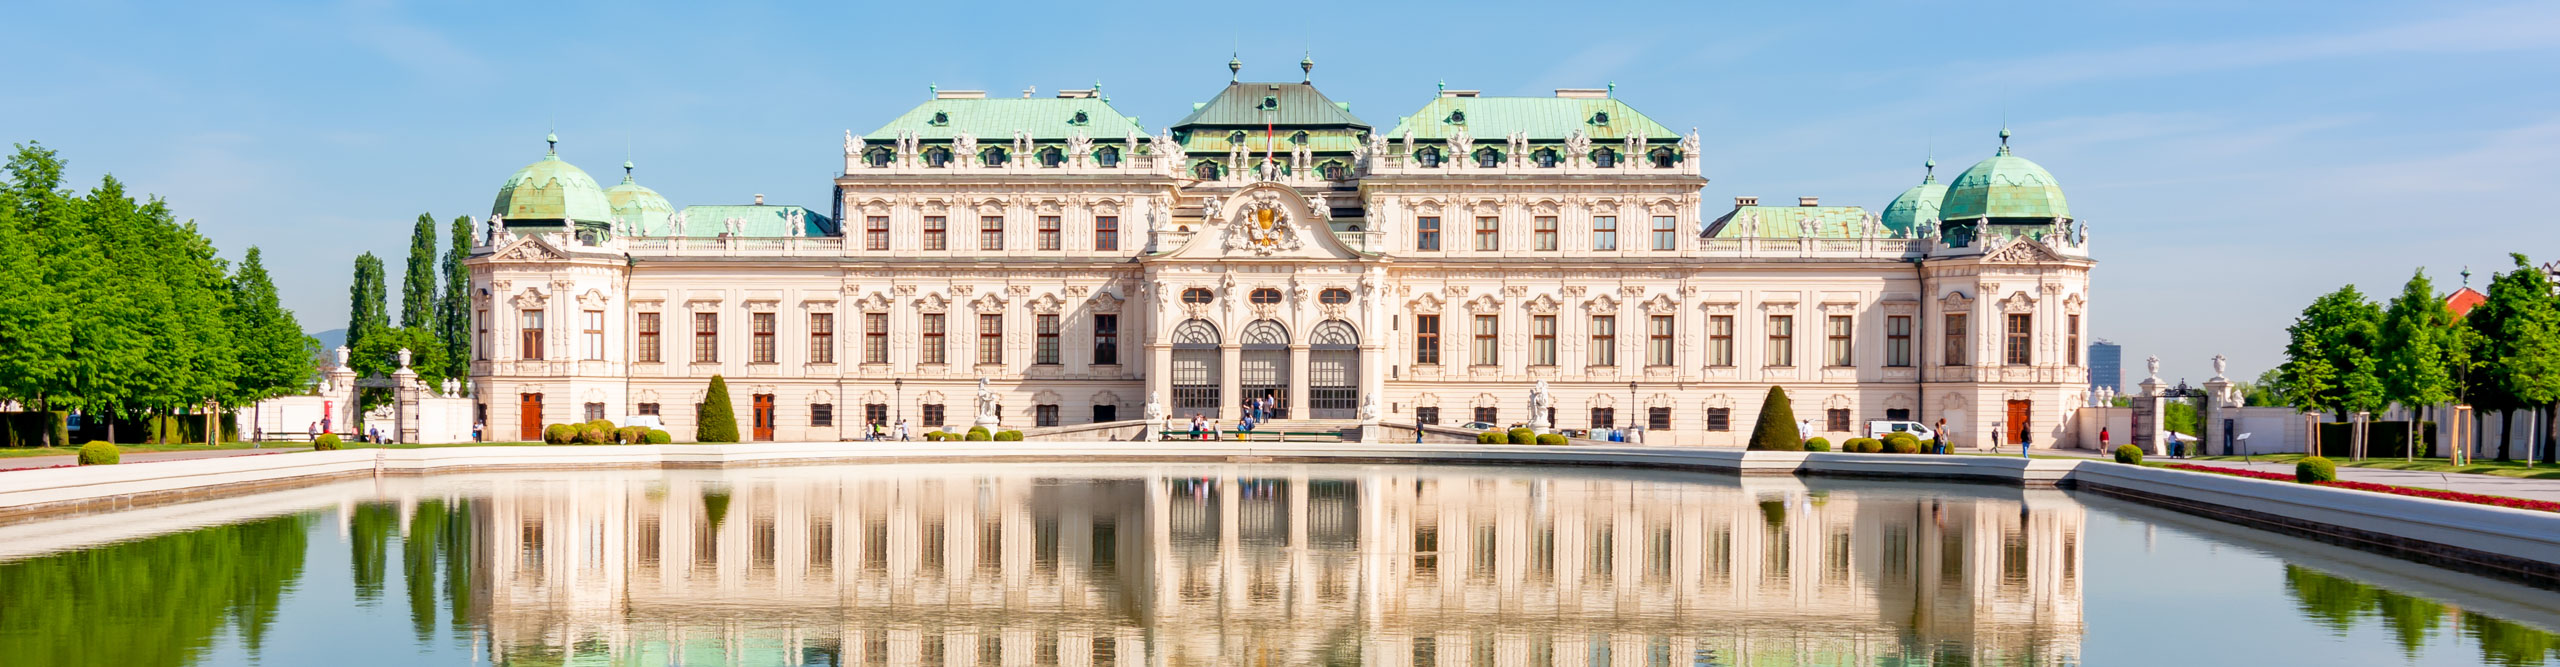 Belvedere Palace and gardens, reflected in the water on a sunny day in Vienna, Austria 